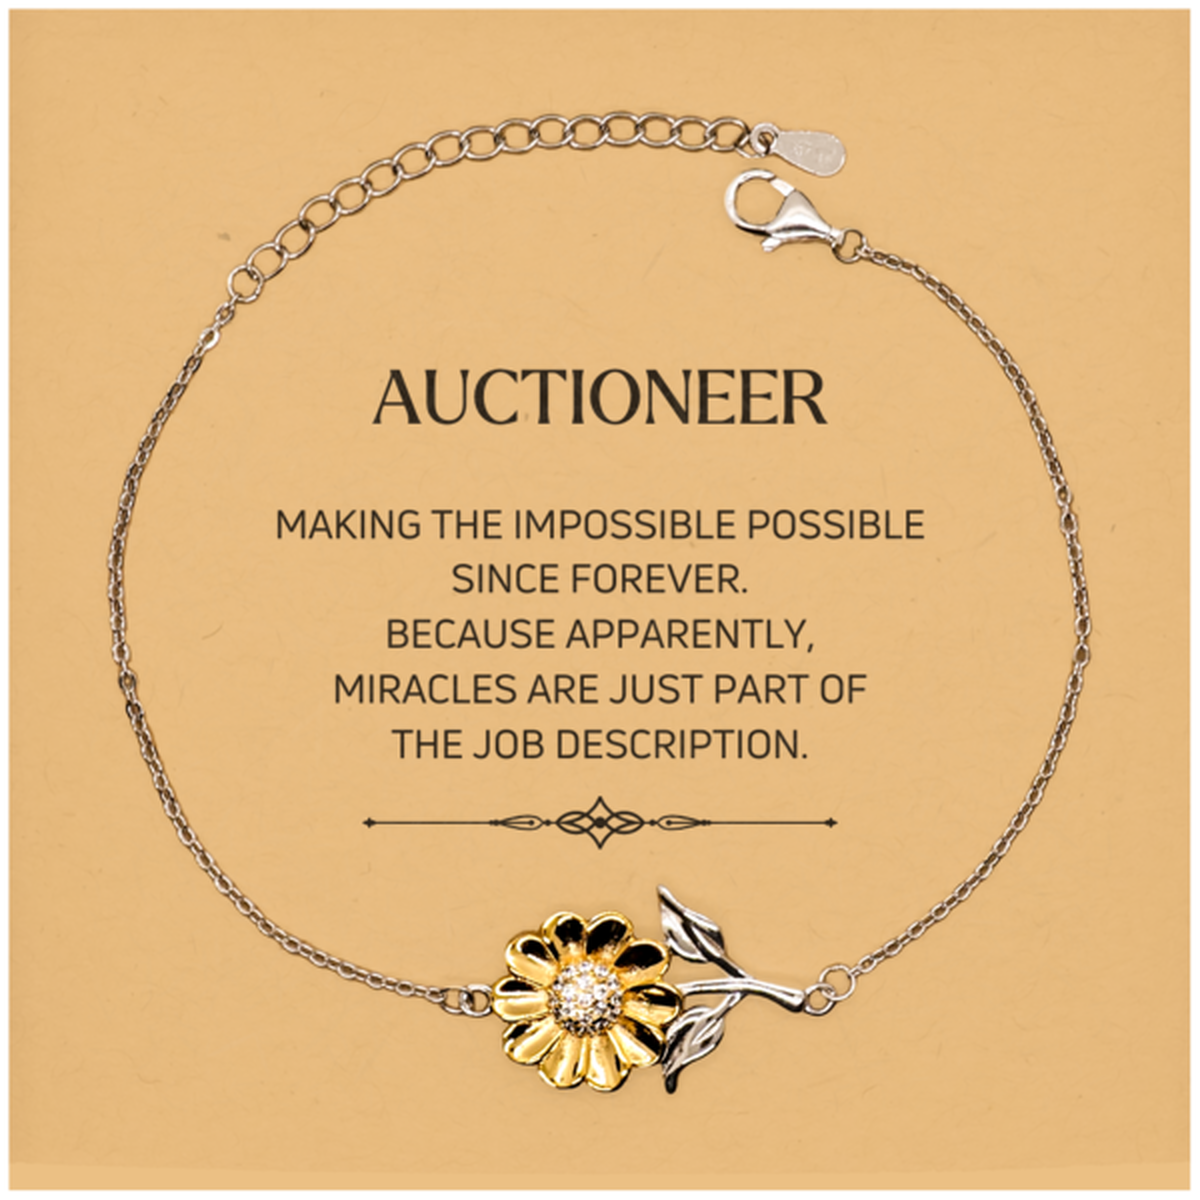 Funny Auctioneer Gifts, Miracles are just part of the job description, Inspirational Birthday Christmas Sunflower Bracelet For Auctioneer, Men, Women, Coworkers, Friends, Boss